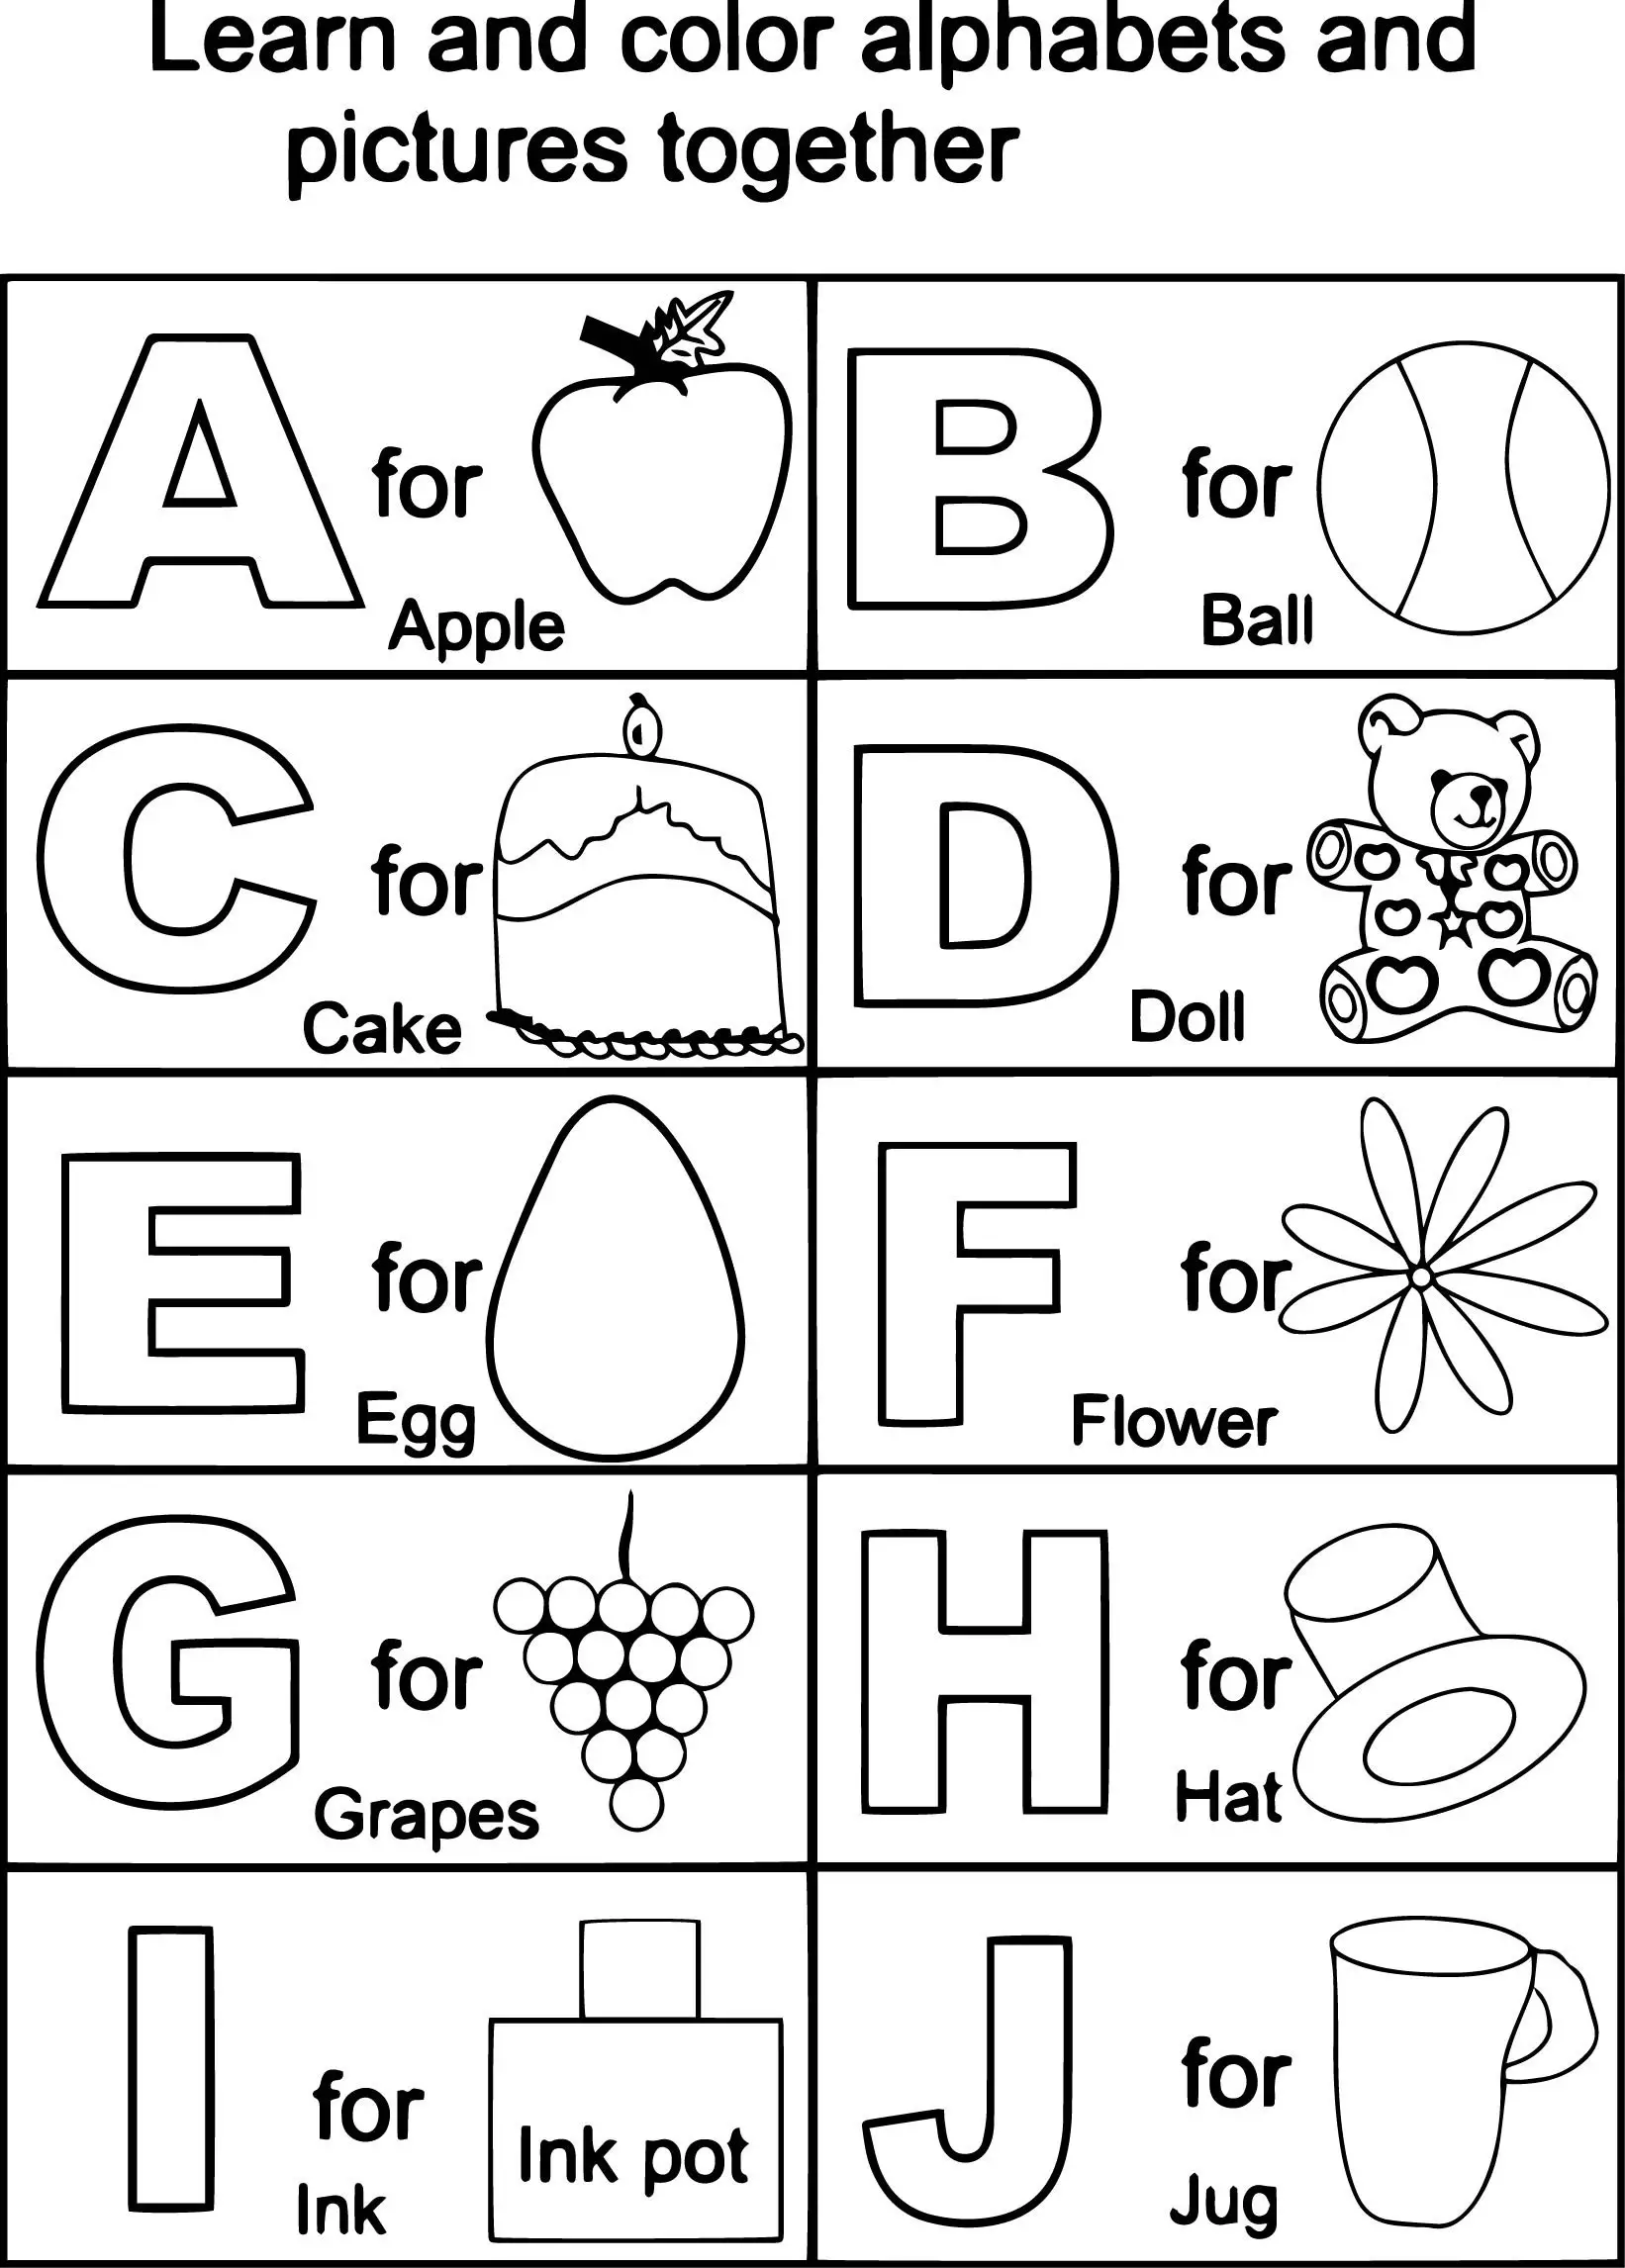 Free Printable Alphabet Flash Cards To Color